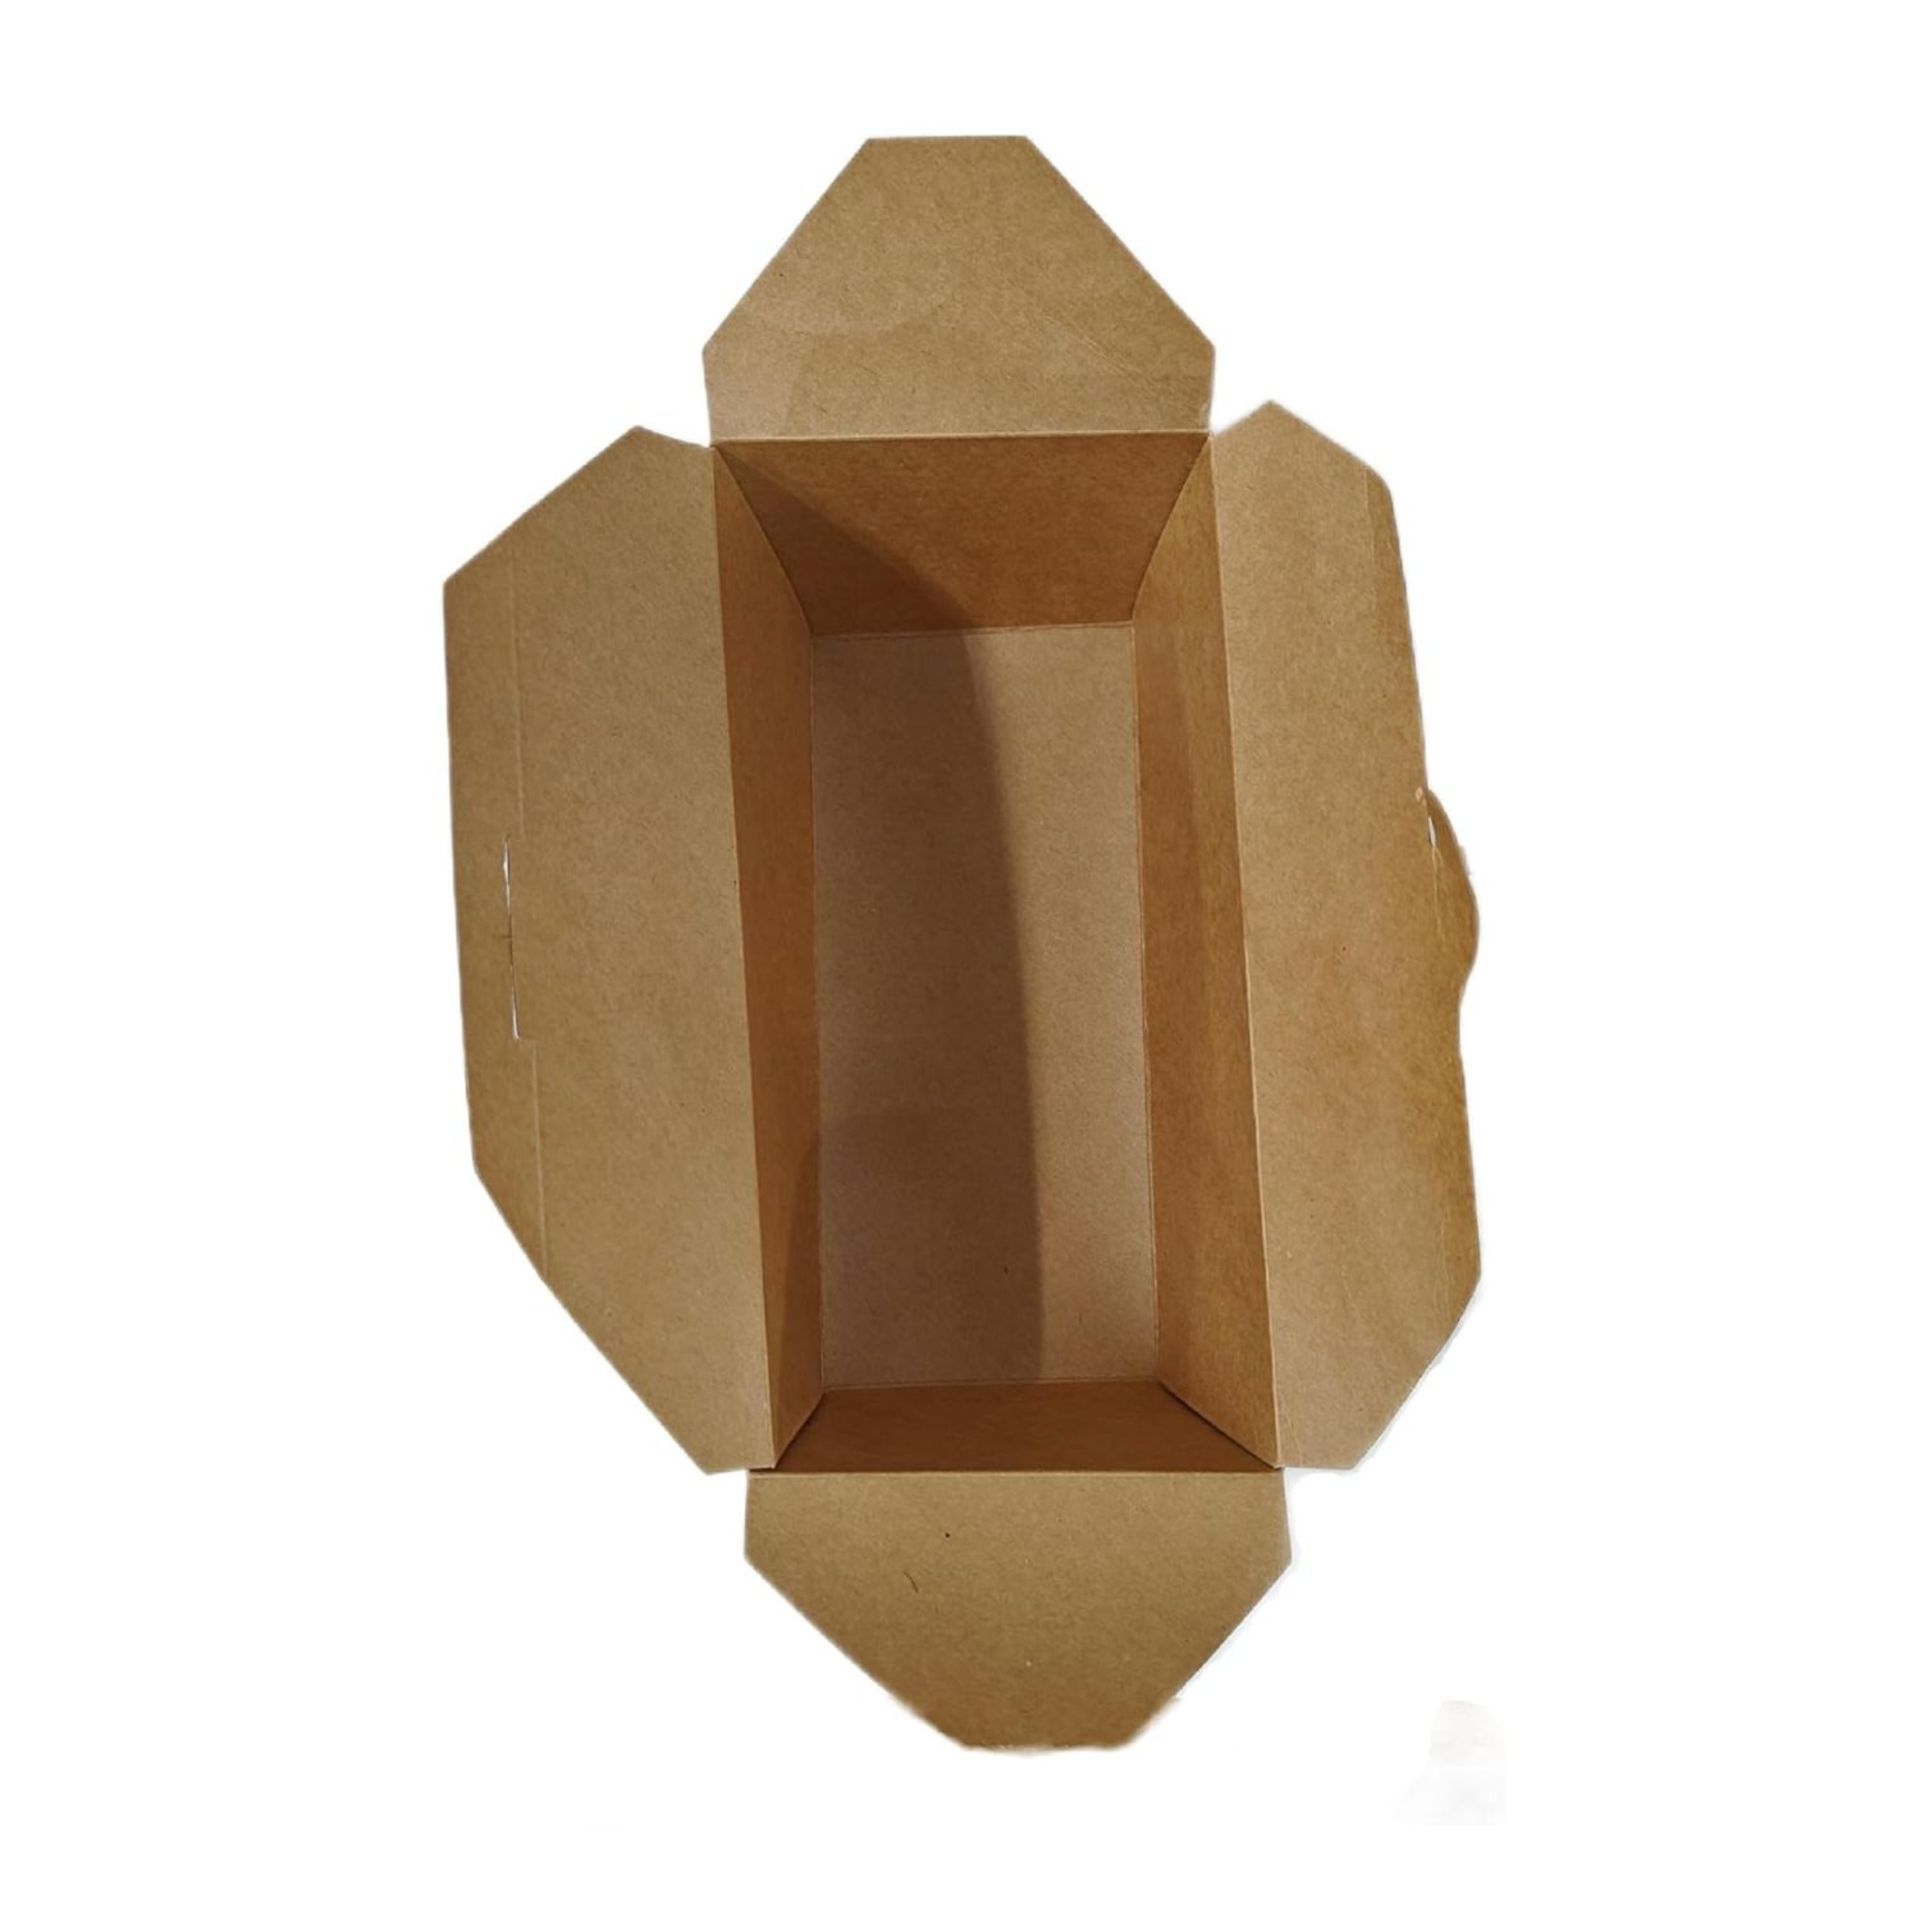 5 BOXES OF 40 FOOD TAKEAWAY BOXES, DISPOSABLE KRAFT BOXES - Image 2 of 4